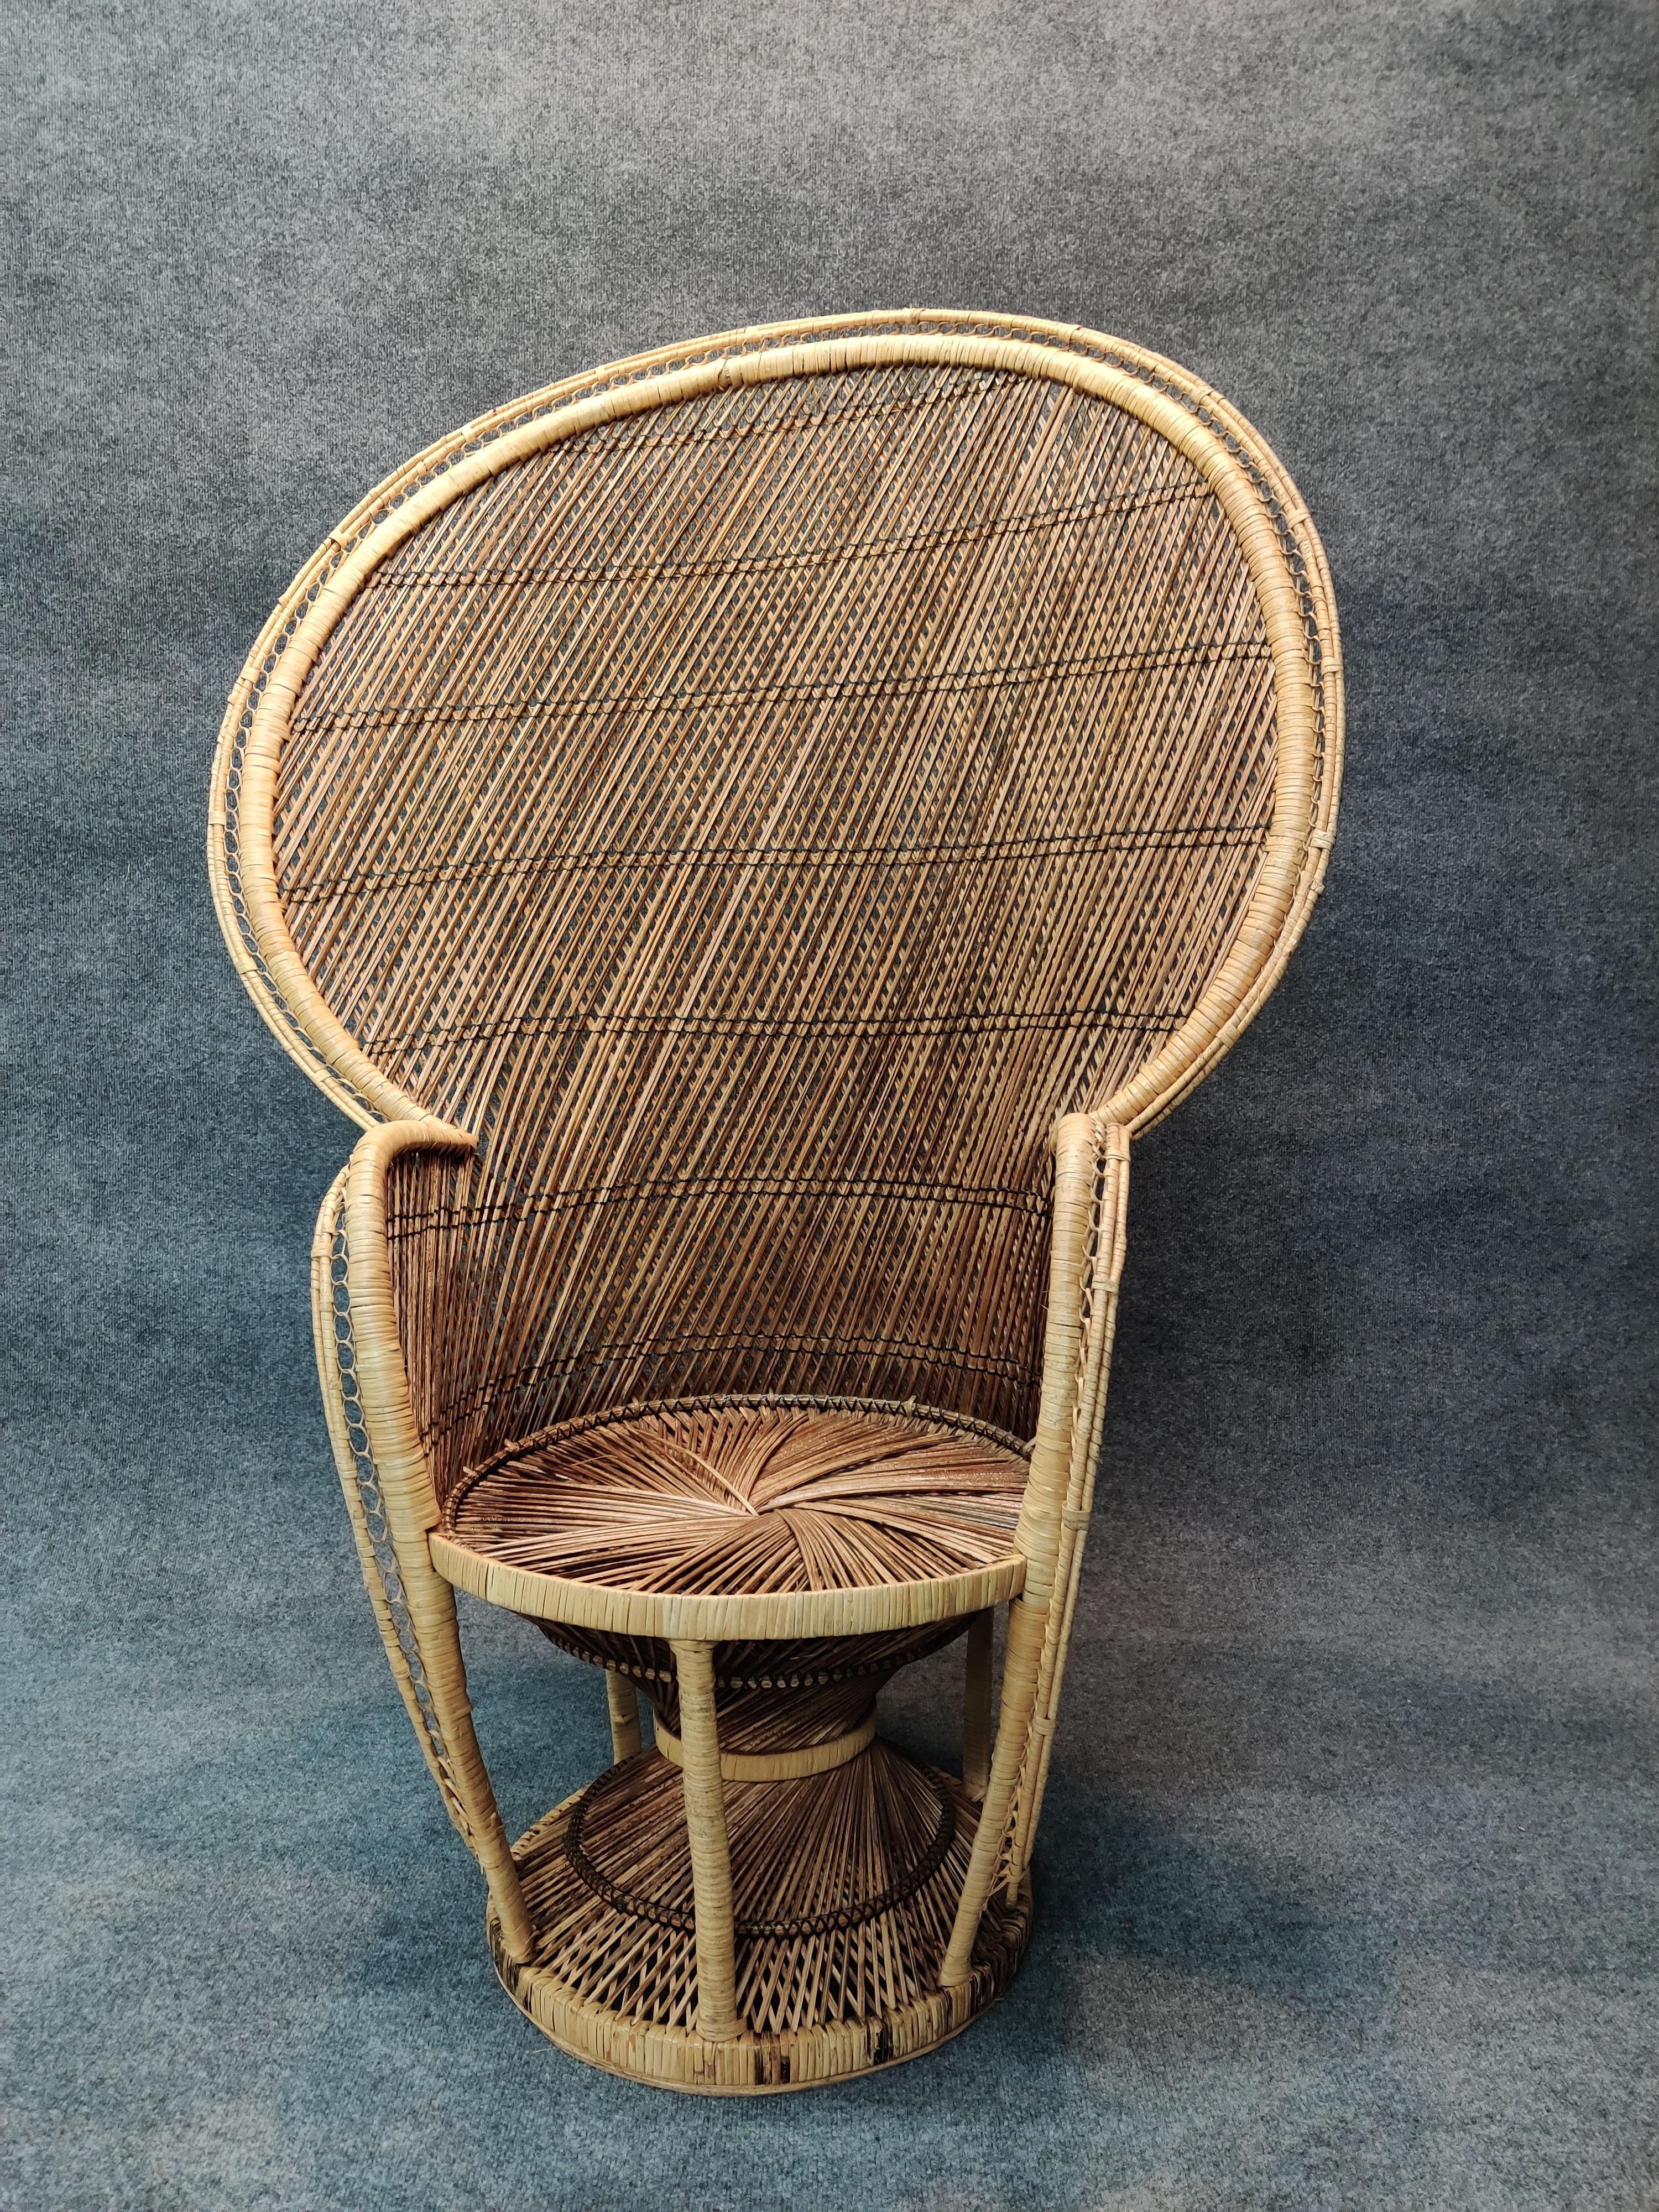 Bohemian chic stylish handcrafted tall and elaborate peackock chair from the 1960s. Sturdy and comfortable for everyday use. Few breaks or losses observed. Minor oxidation to material. Very good vintage condition.